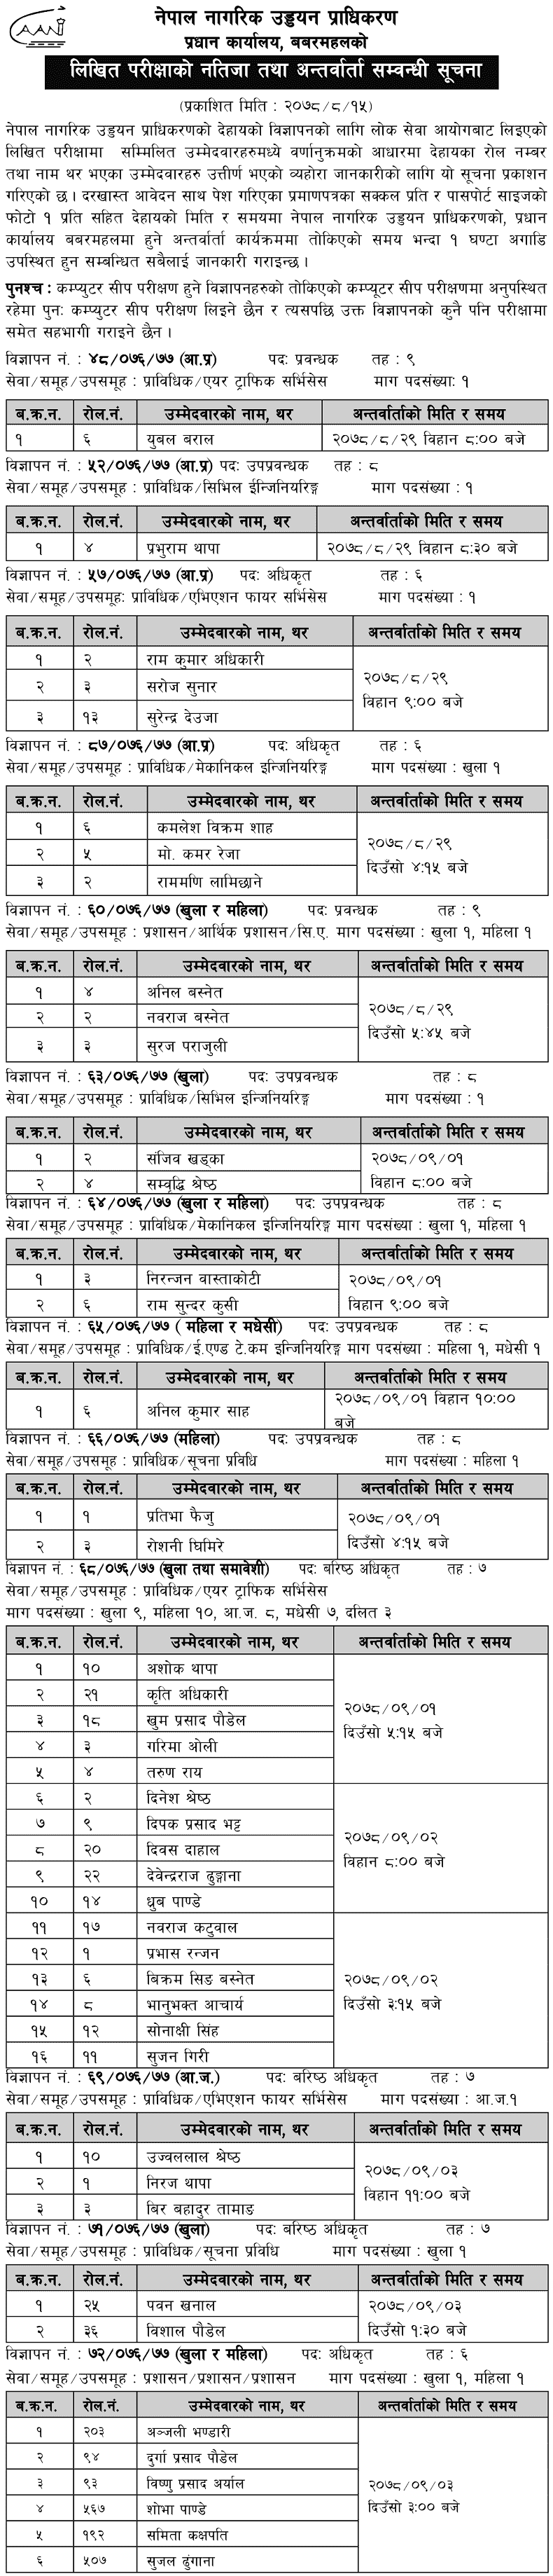 Civil Aviation Authority of Nepal CAAN Written Exam Result and Interview Schedule